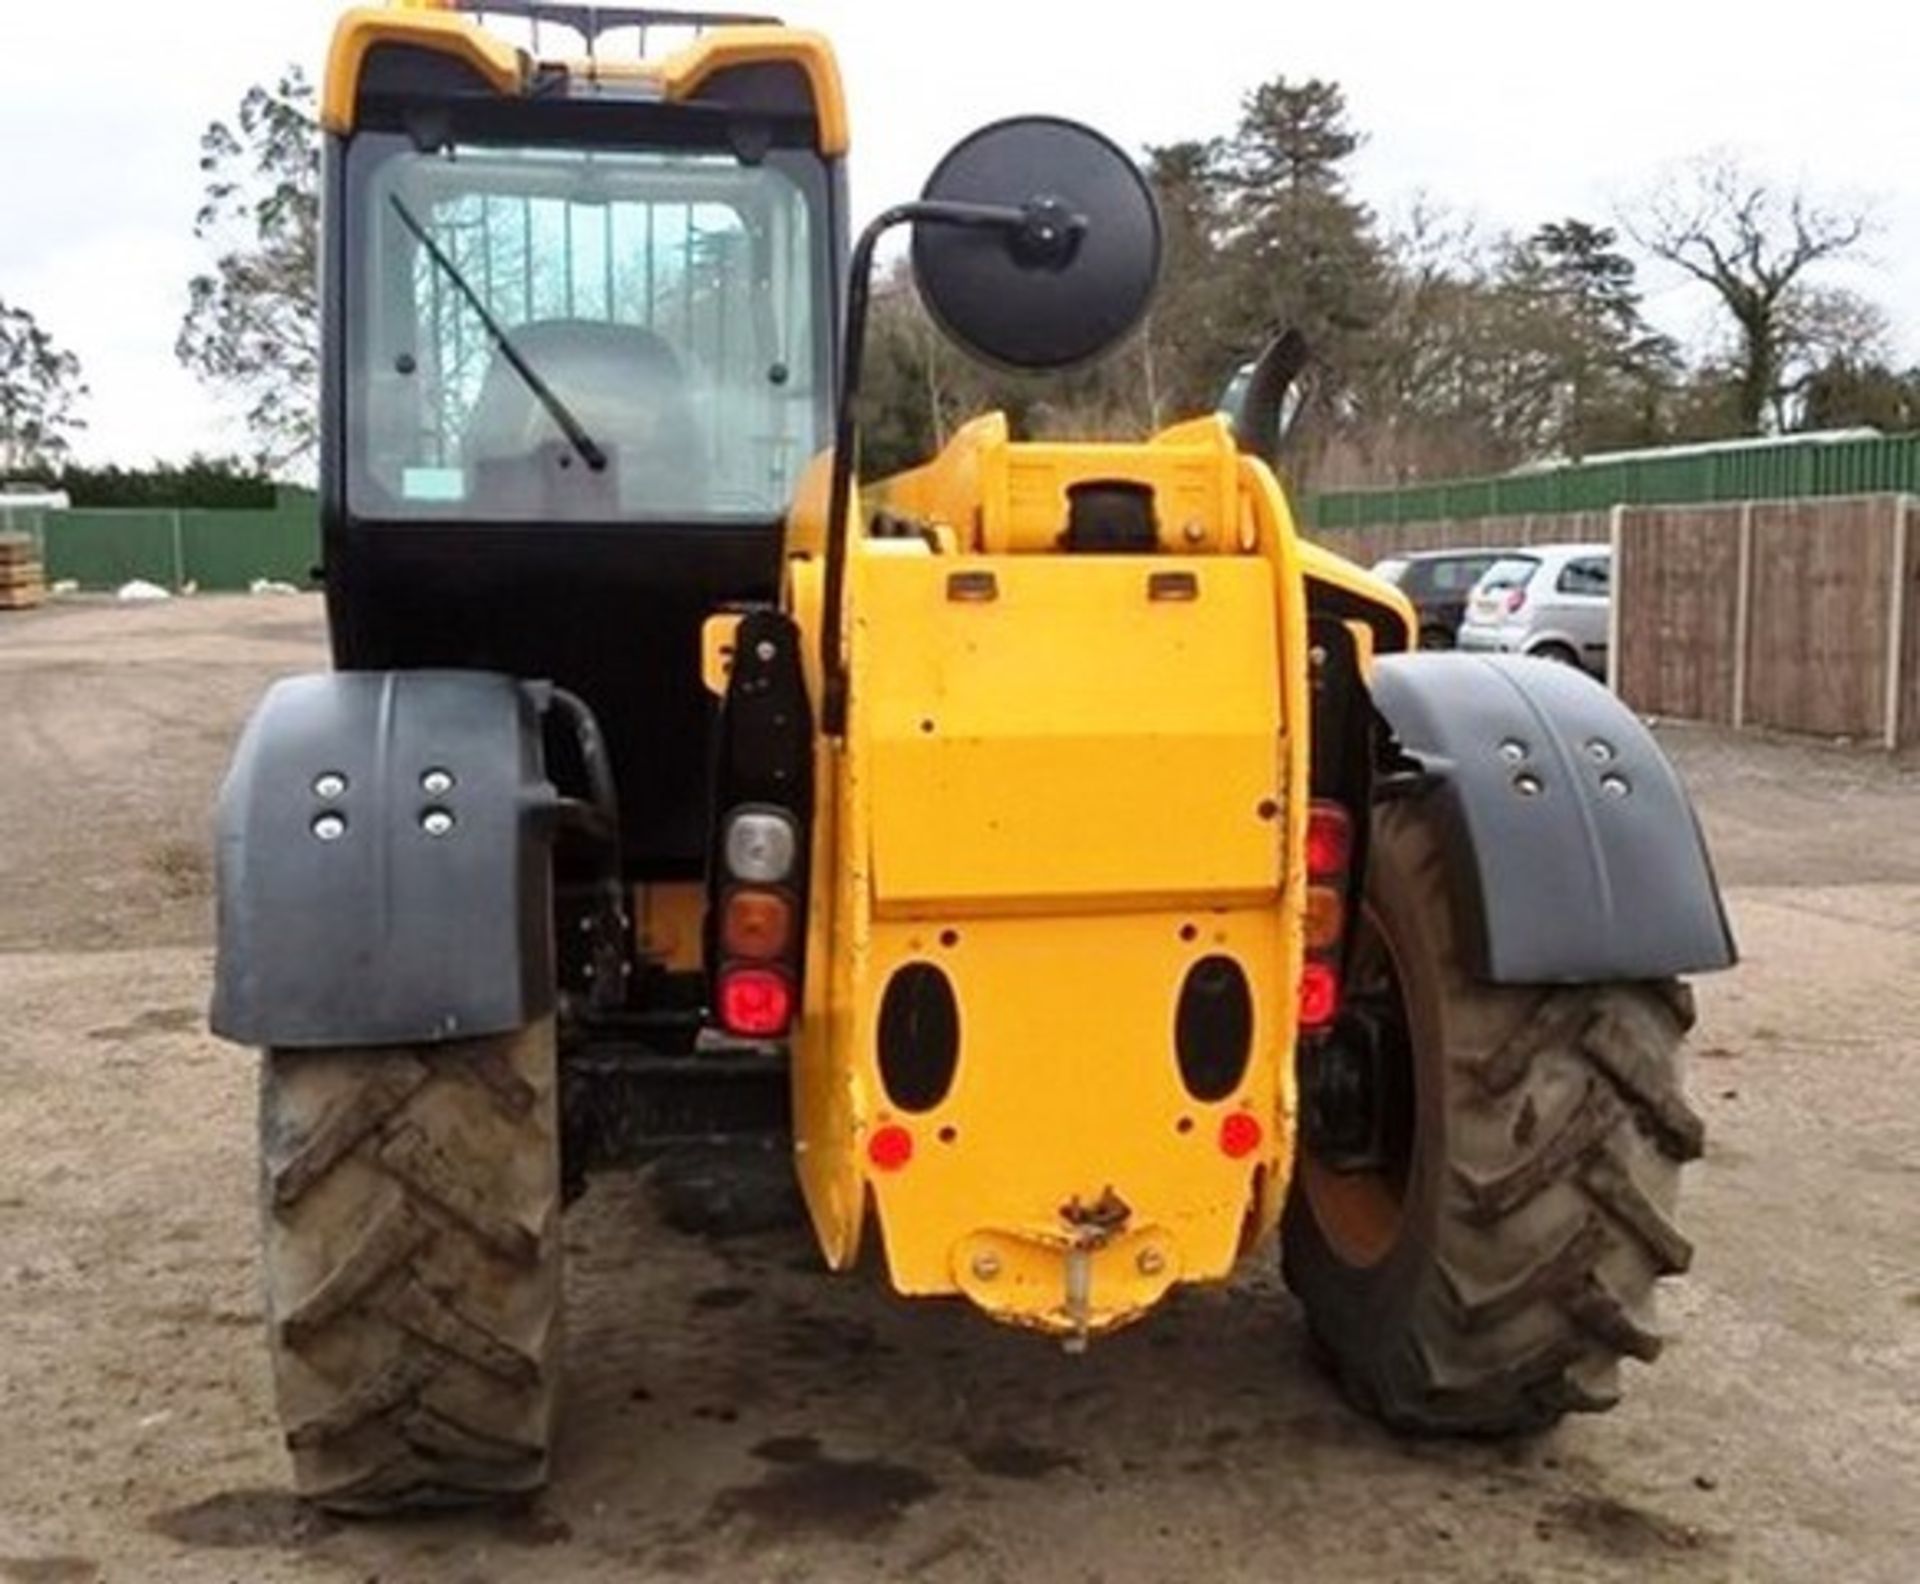 2014 JCB 531-70 TELEHANDLER, SN 2181521, 1399 HOURS, AUX PIPE WORK, MANUAL QUICK HITCH, 60% TYRE - Image 7 of 13